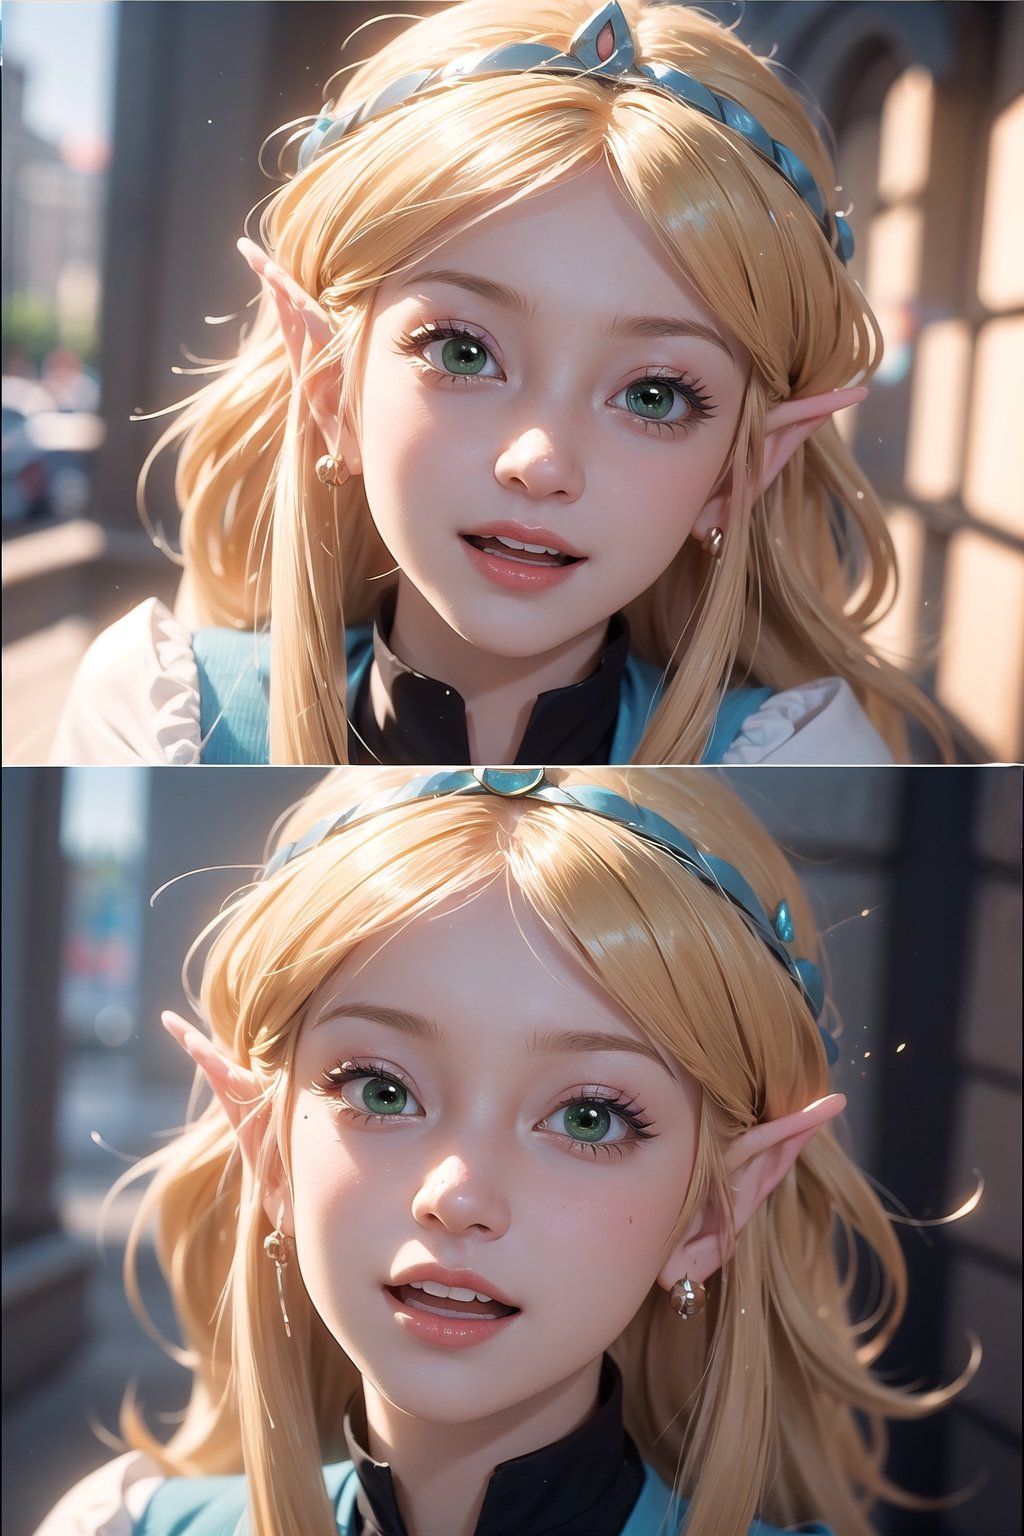 tsmbsszelda, masterpiece, face only, green eyes, blushing, open mouth, smiling